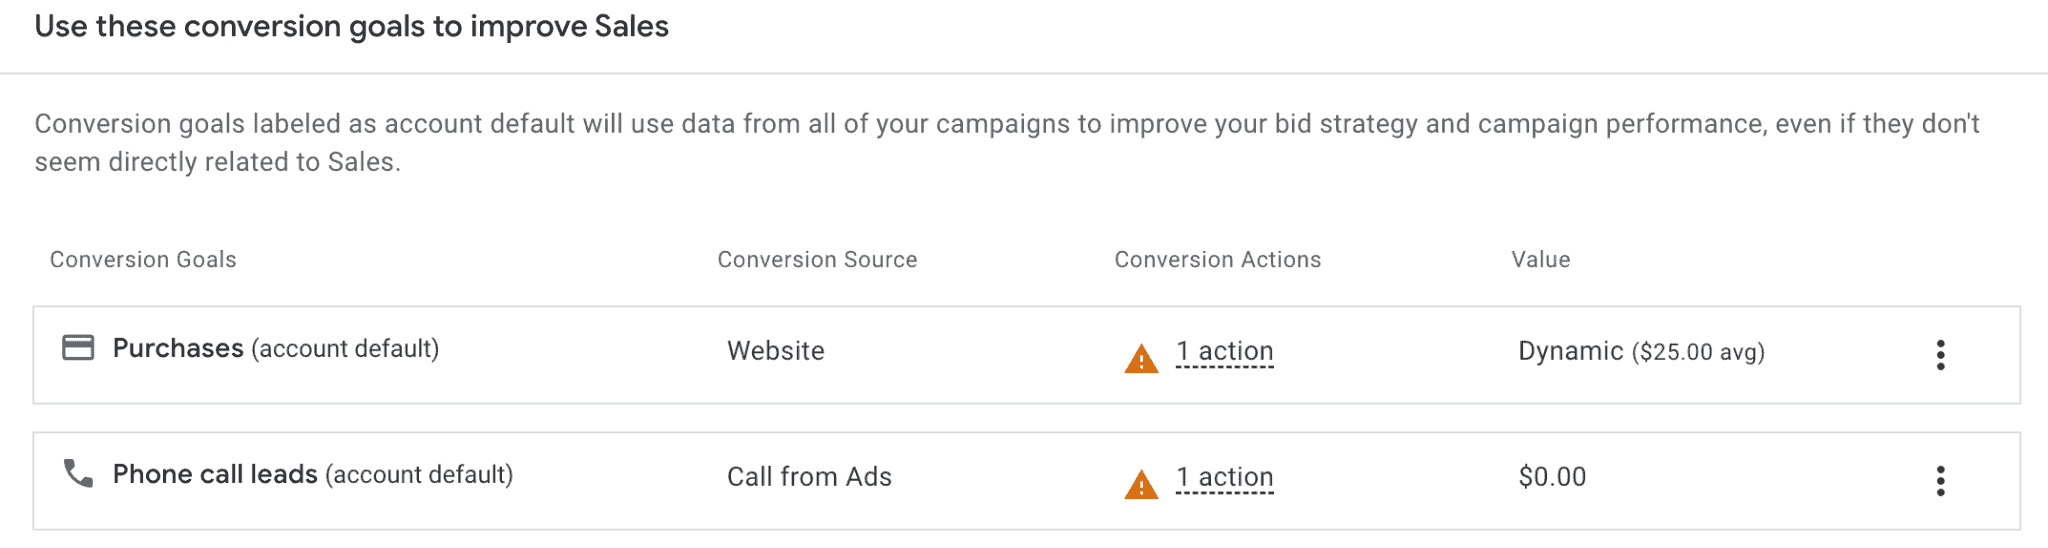 Google Ads platform conversion goals to improve sales. Listed goals include Purchases (from website) and Phone Call Leads (calls from ads)